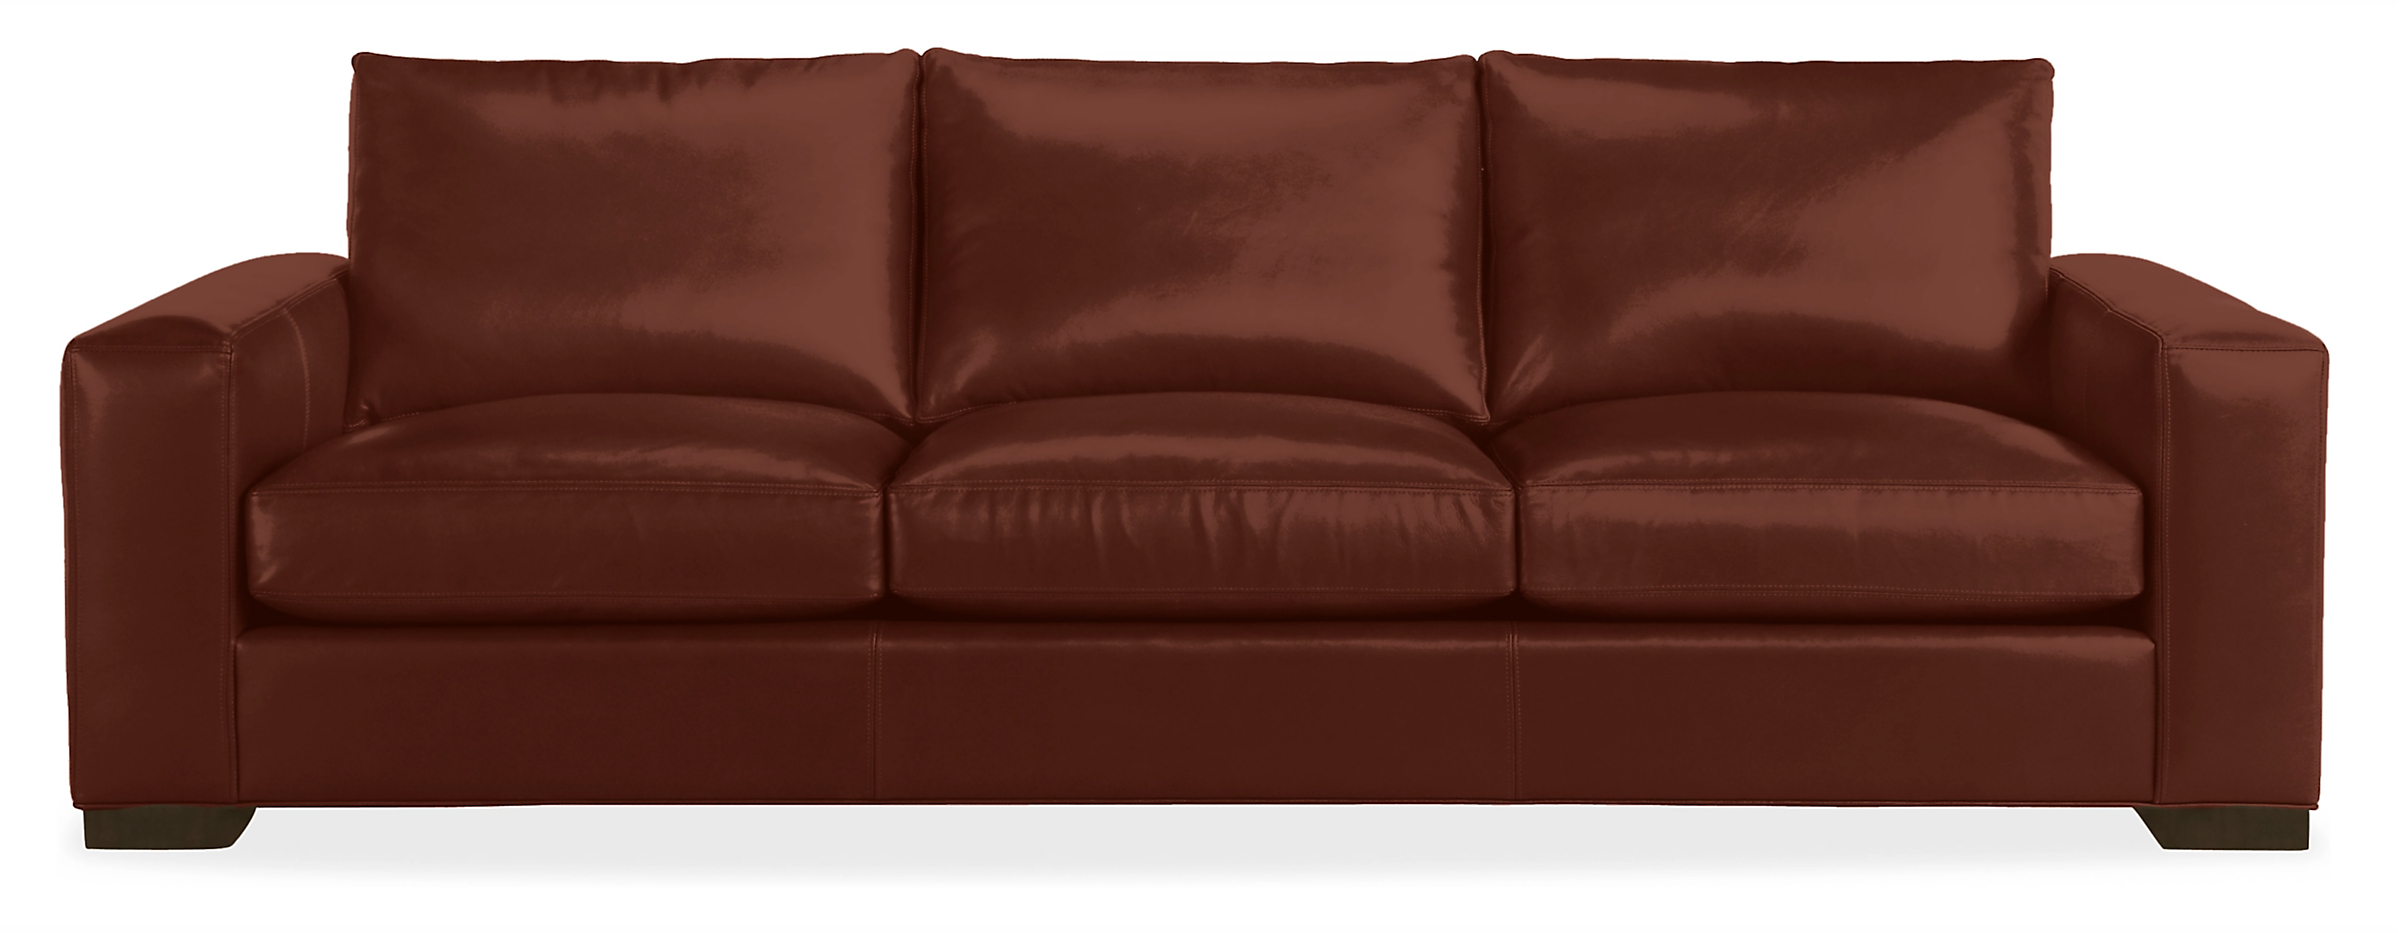 Metro 88" Three-Cushion Sofa in Cyrus Cognac Leather with Charcoal Legs